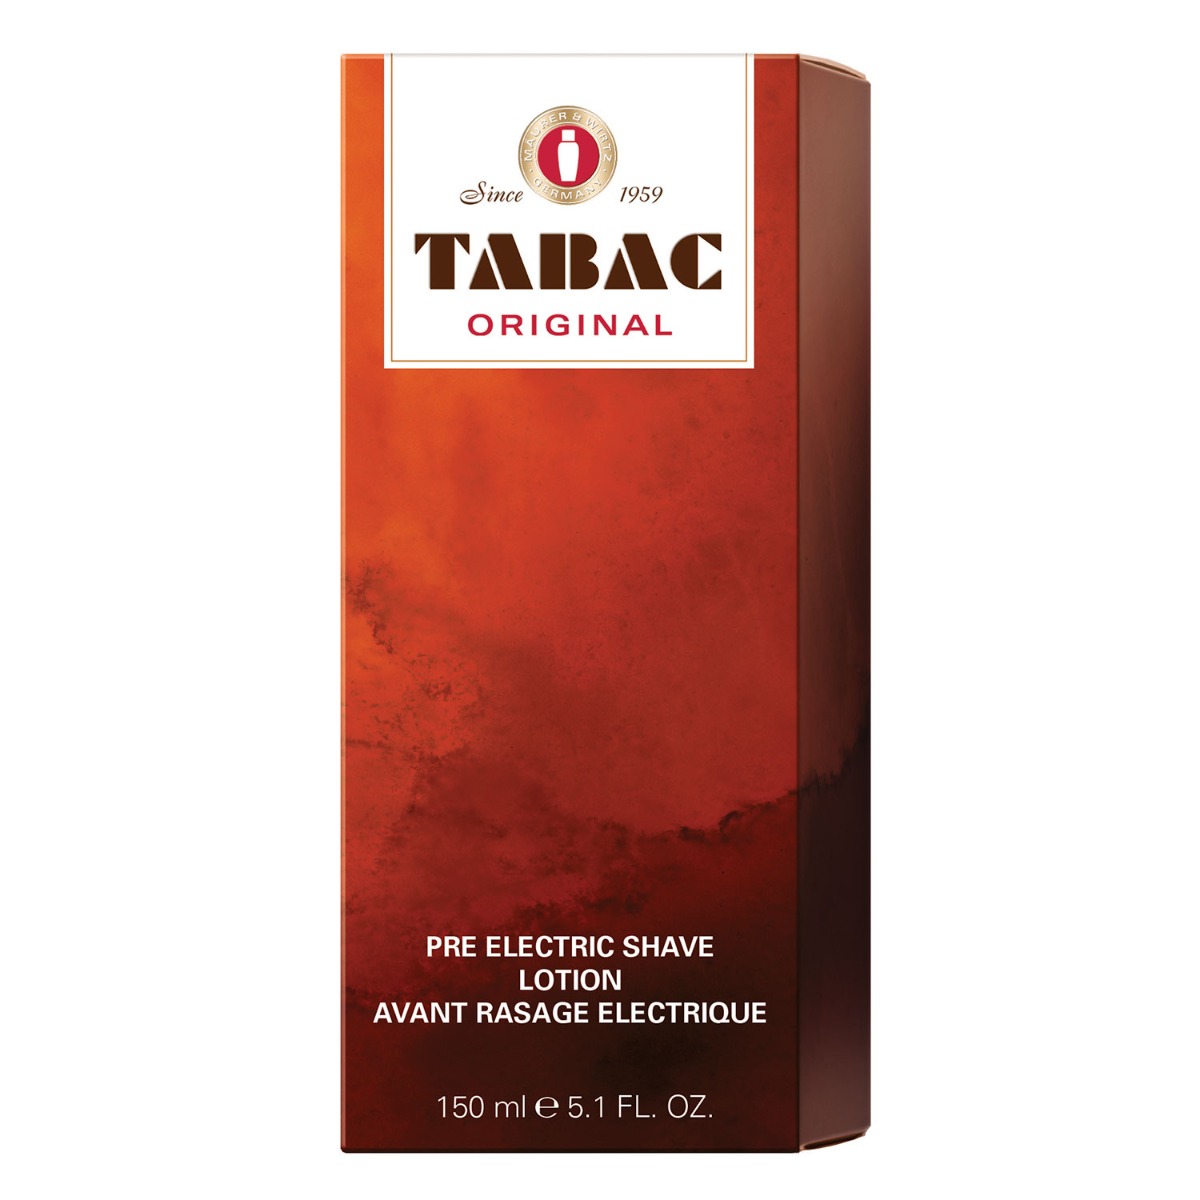 Tabac Original Pre Electric Shave Lotion, 150ml